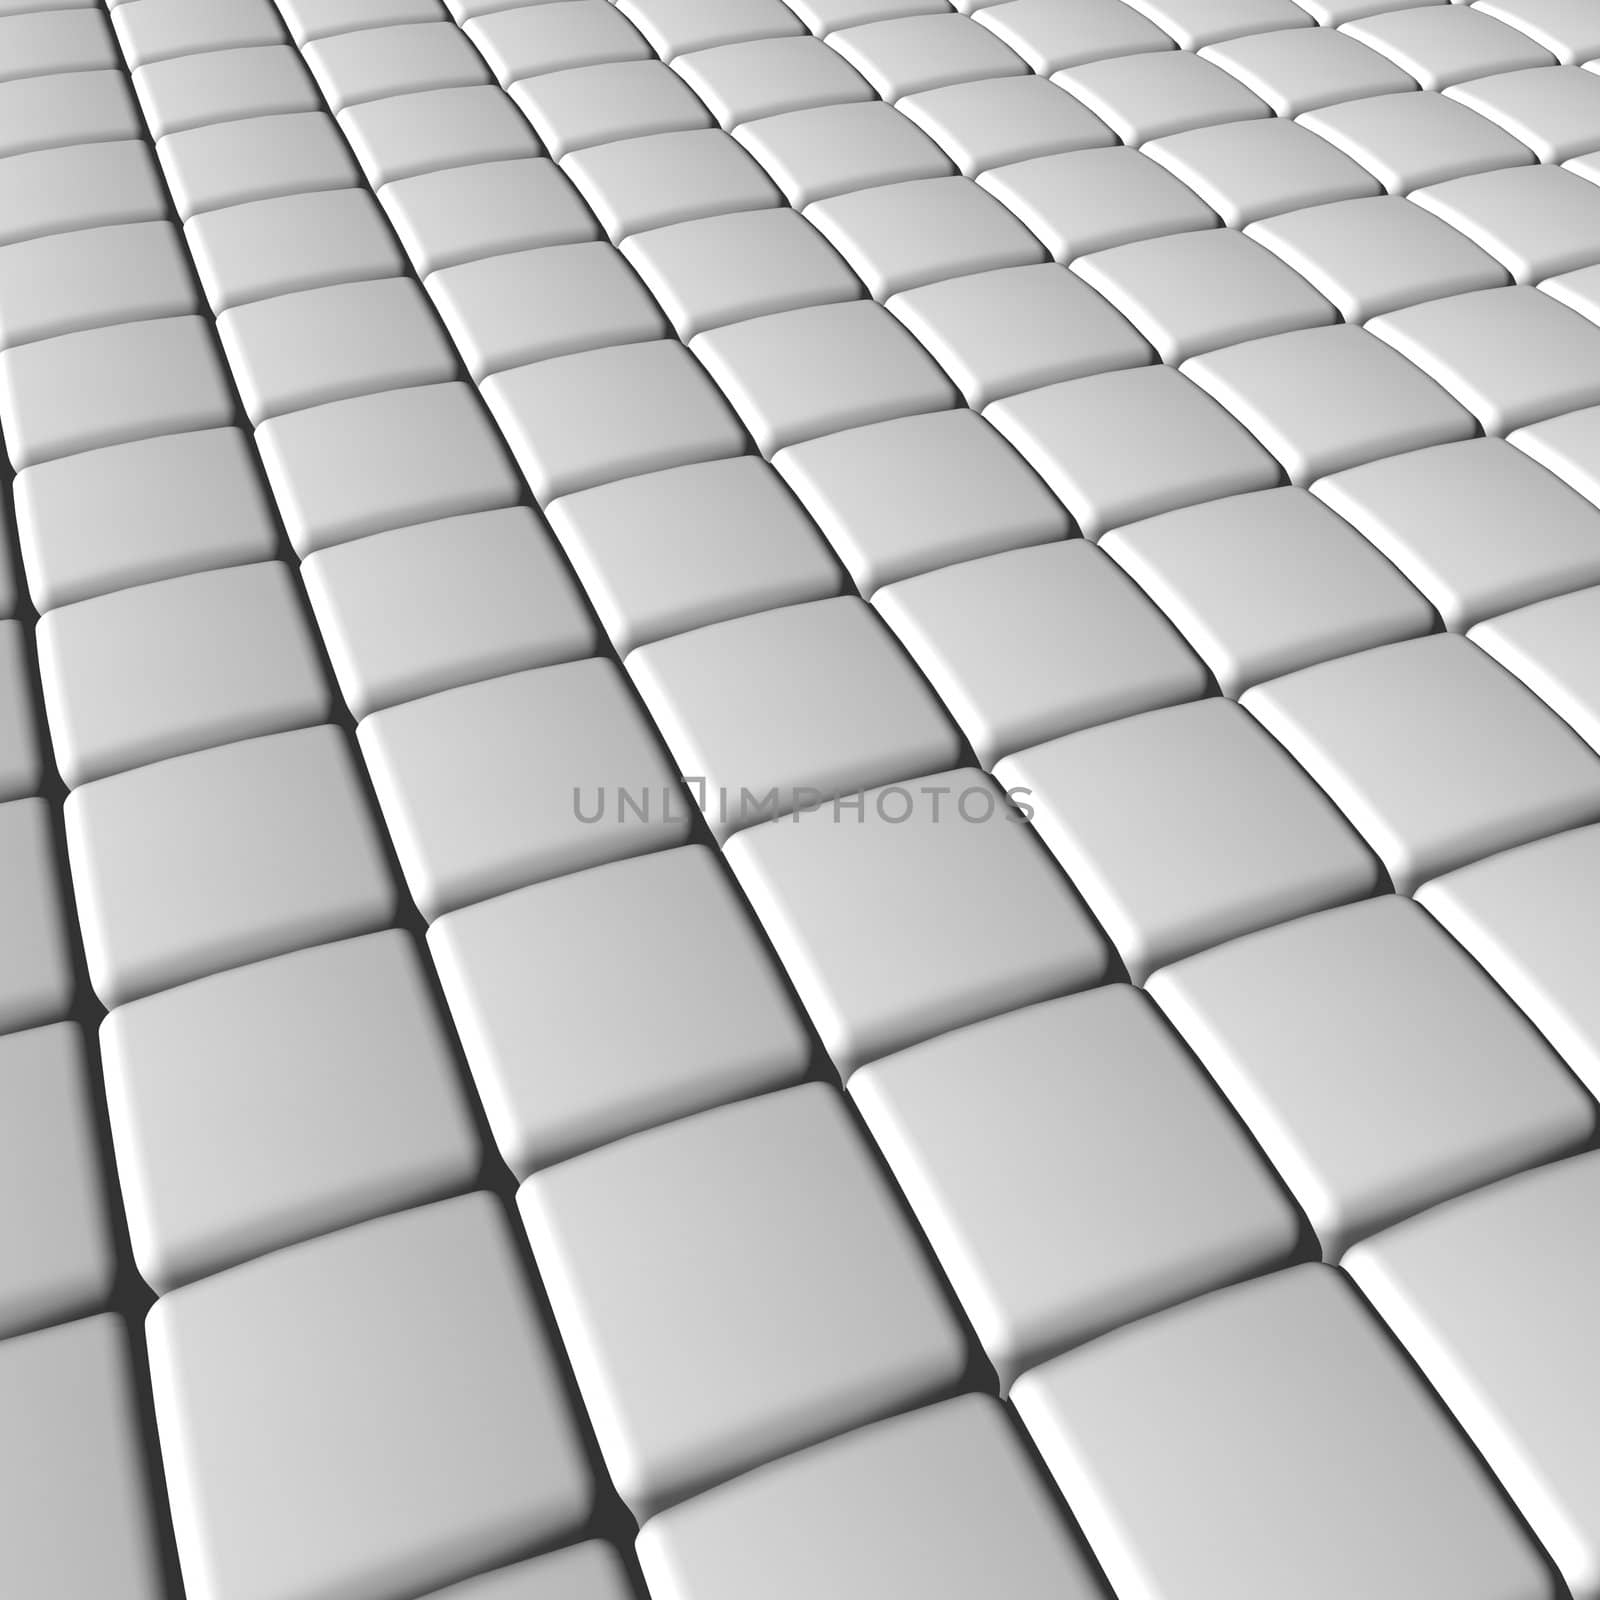 A 3D illustration of soft edged, out of focus metallic cubes forming a grid.